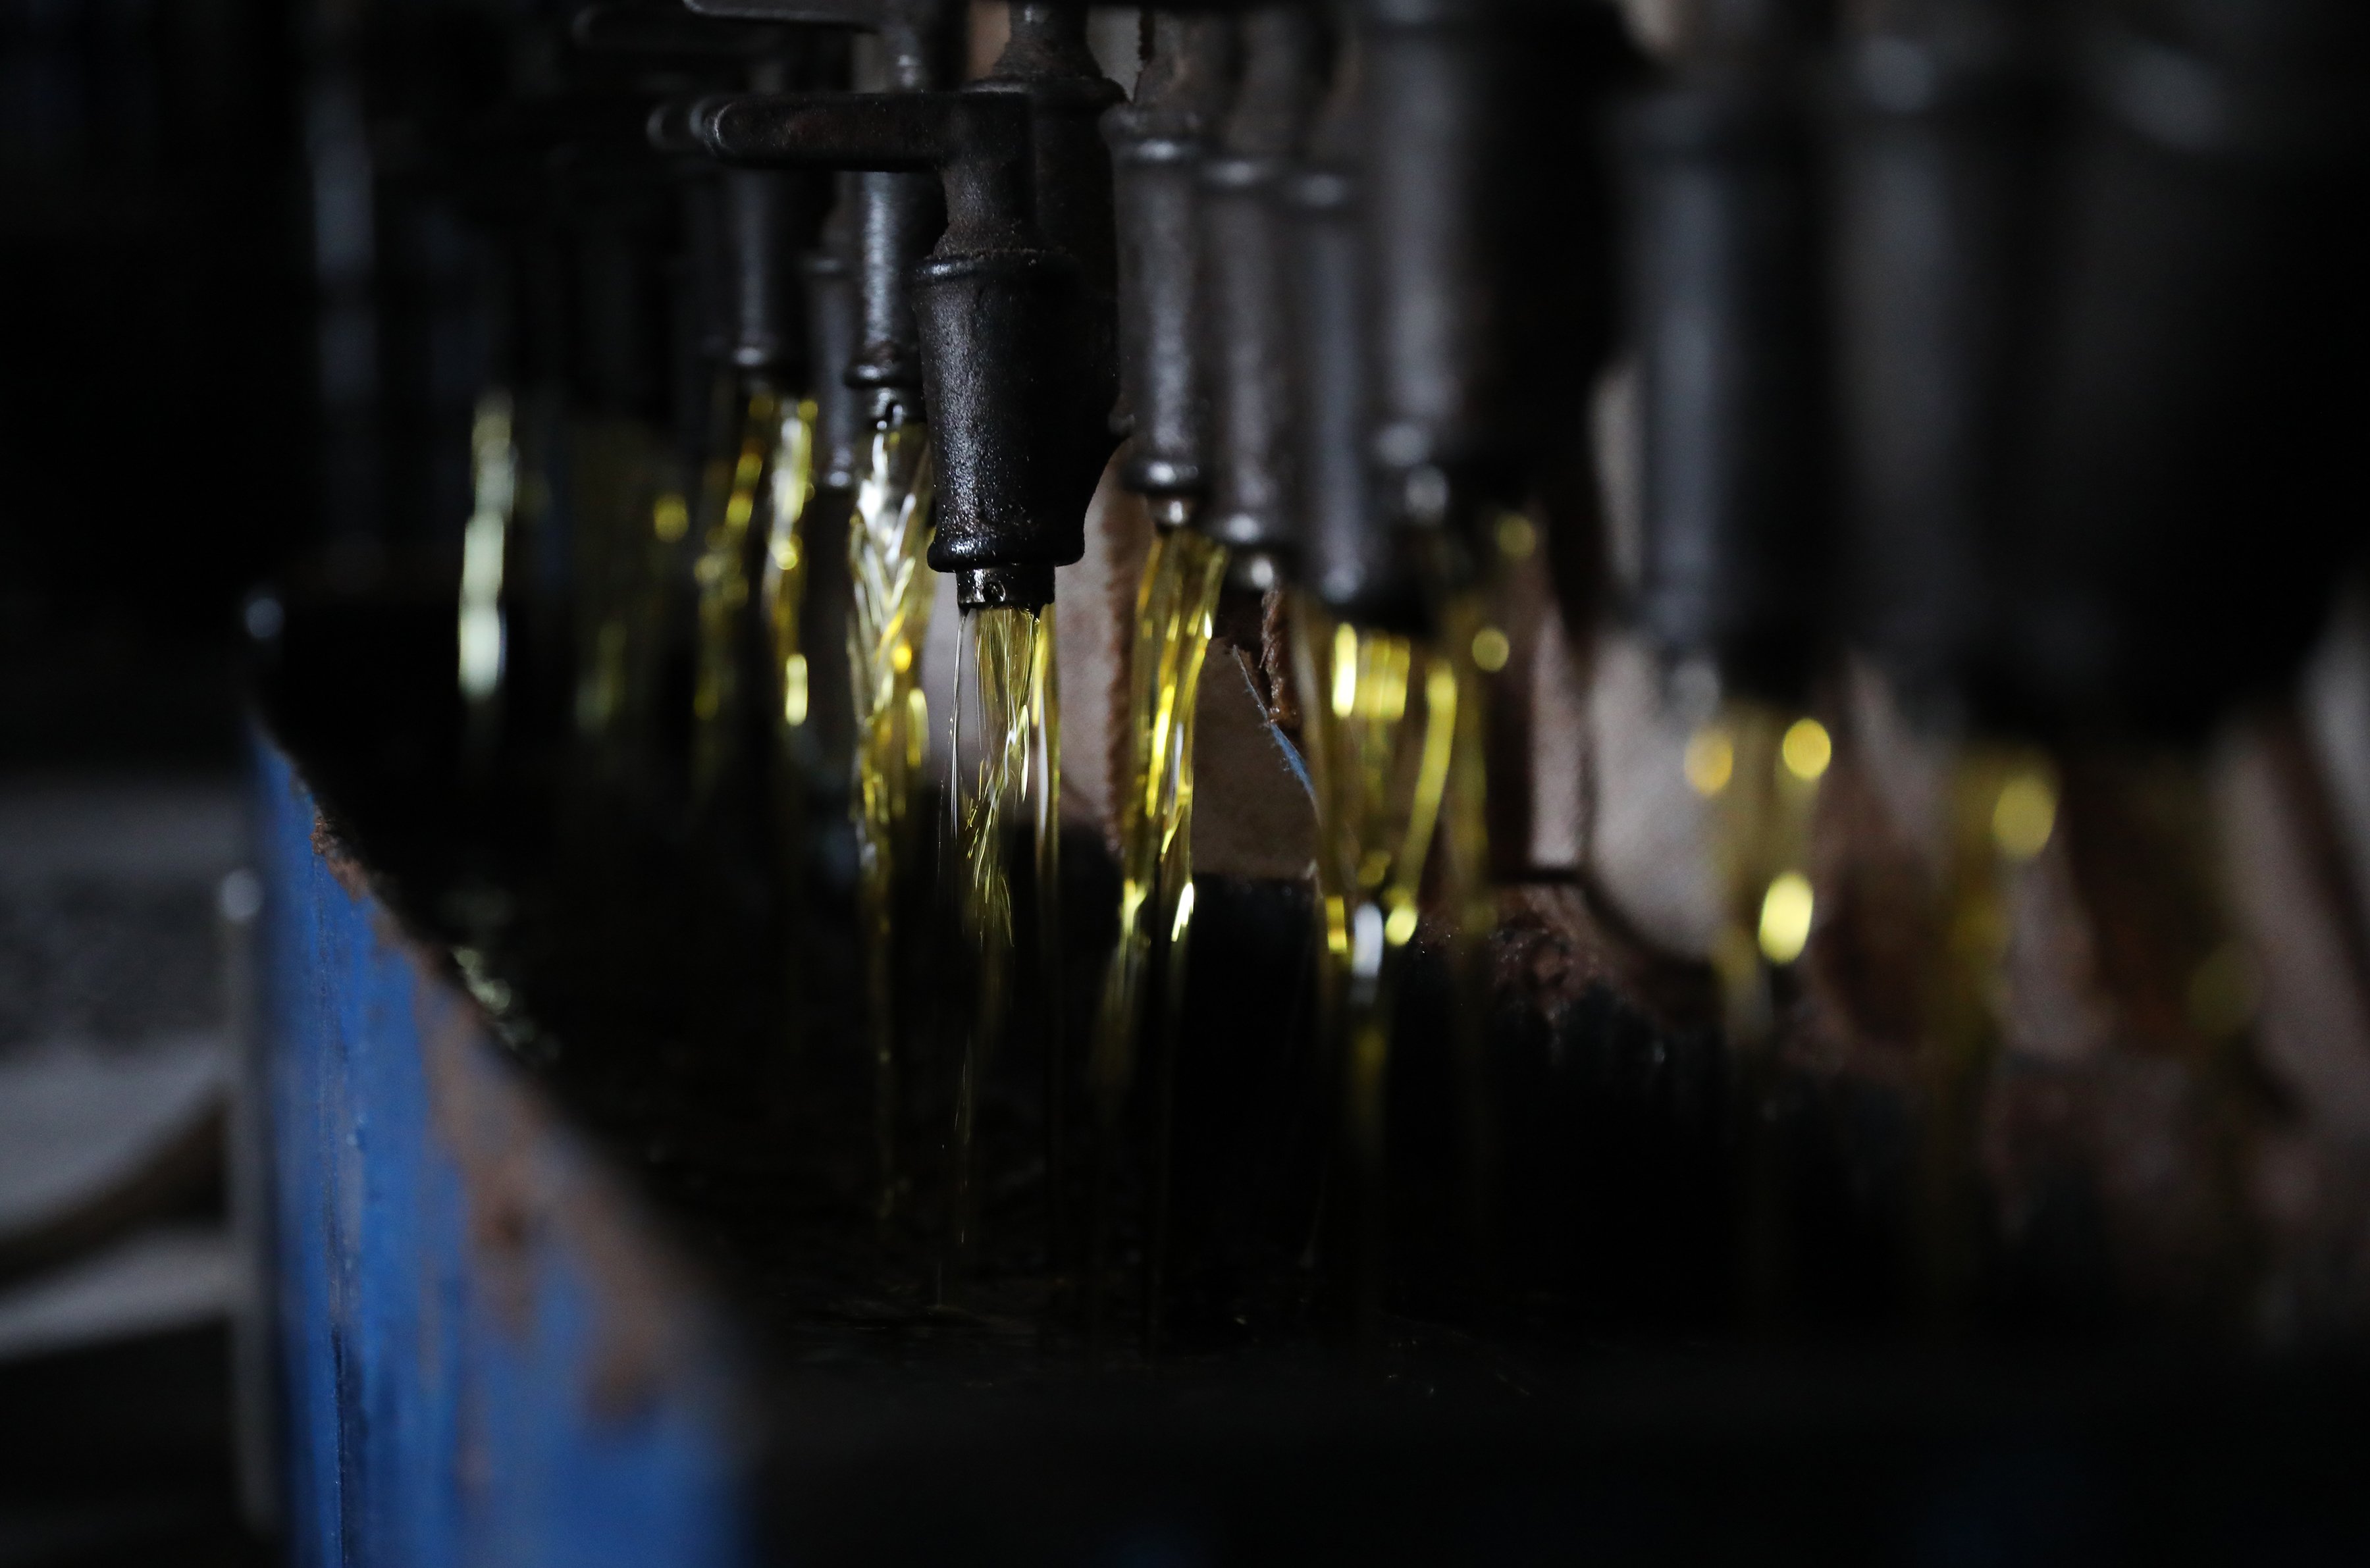 Pure, cold-pressed jojoba oil being produced. Golden in color and fresh oil pouring out of pipes from a press.